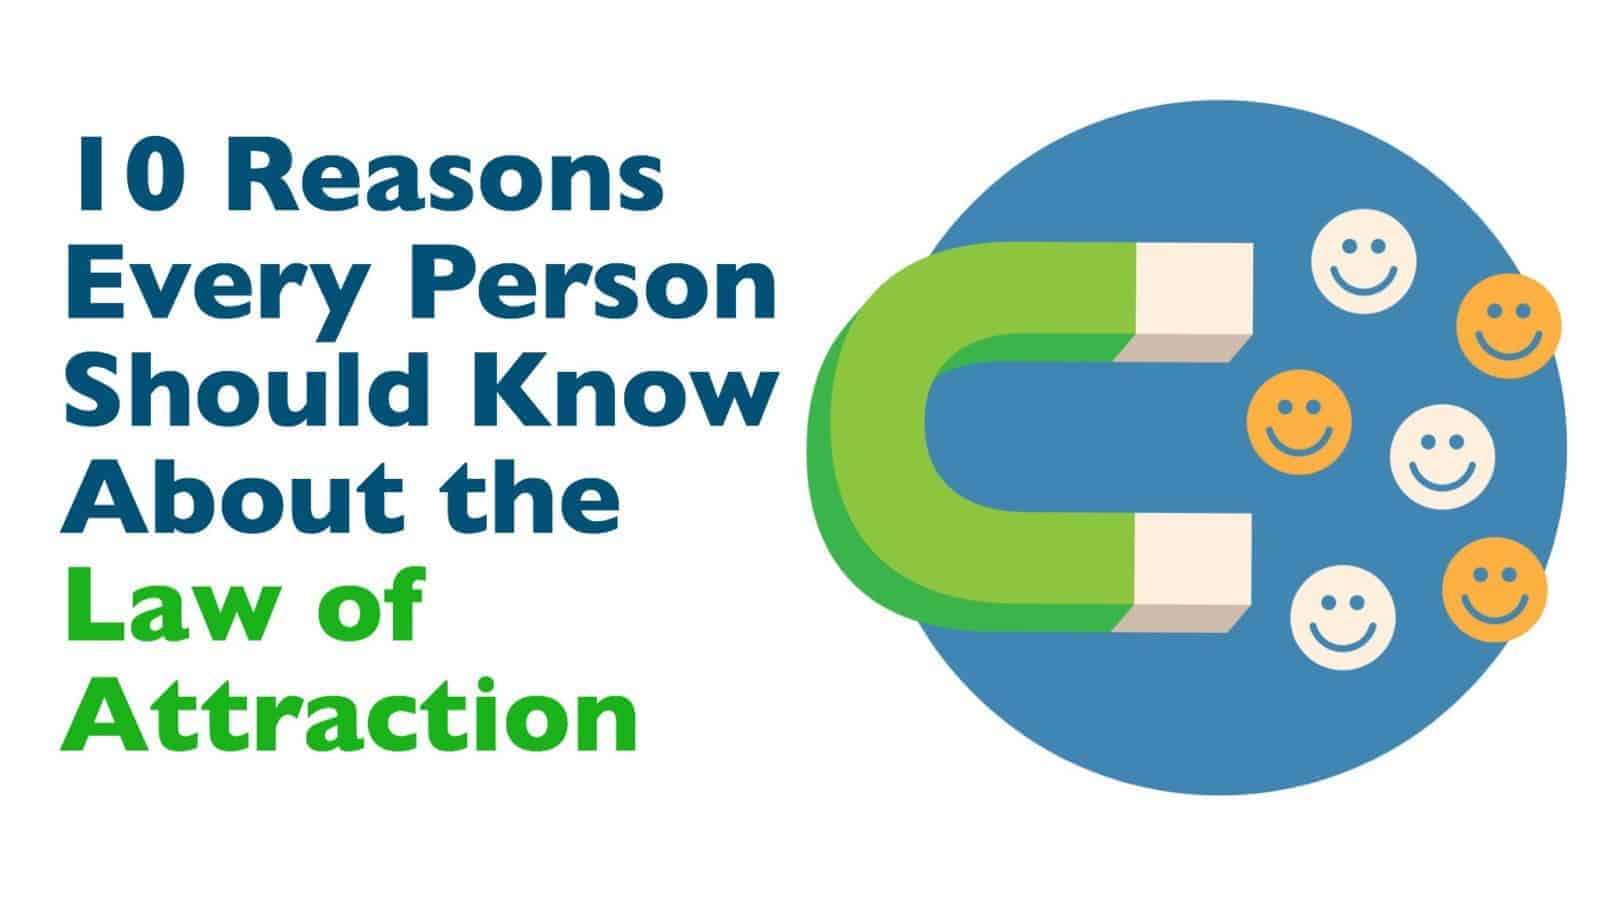 10 Reasons Every Person Should Know About the Law of Attraction